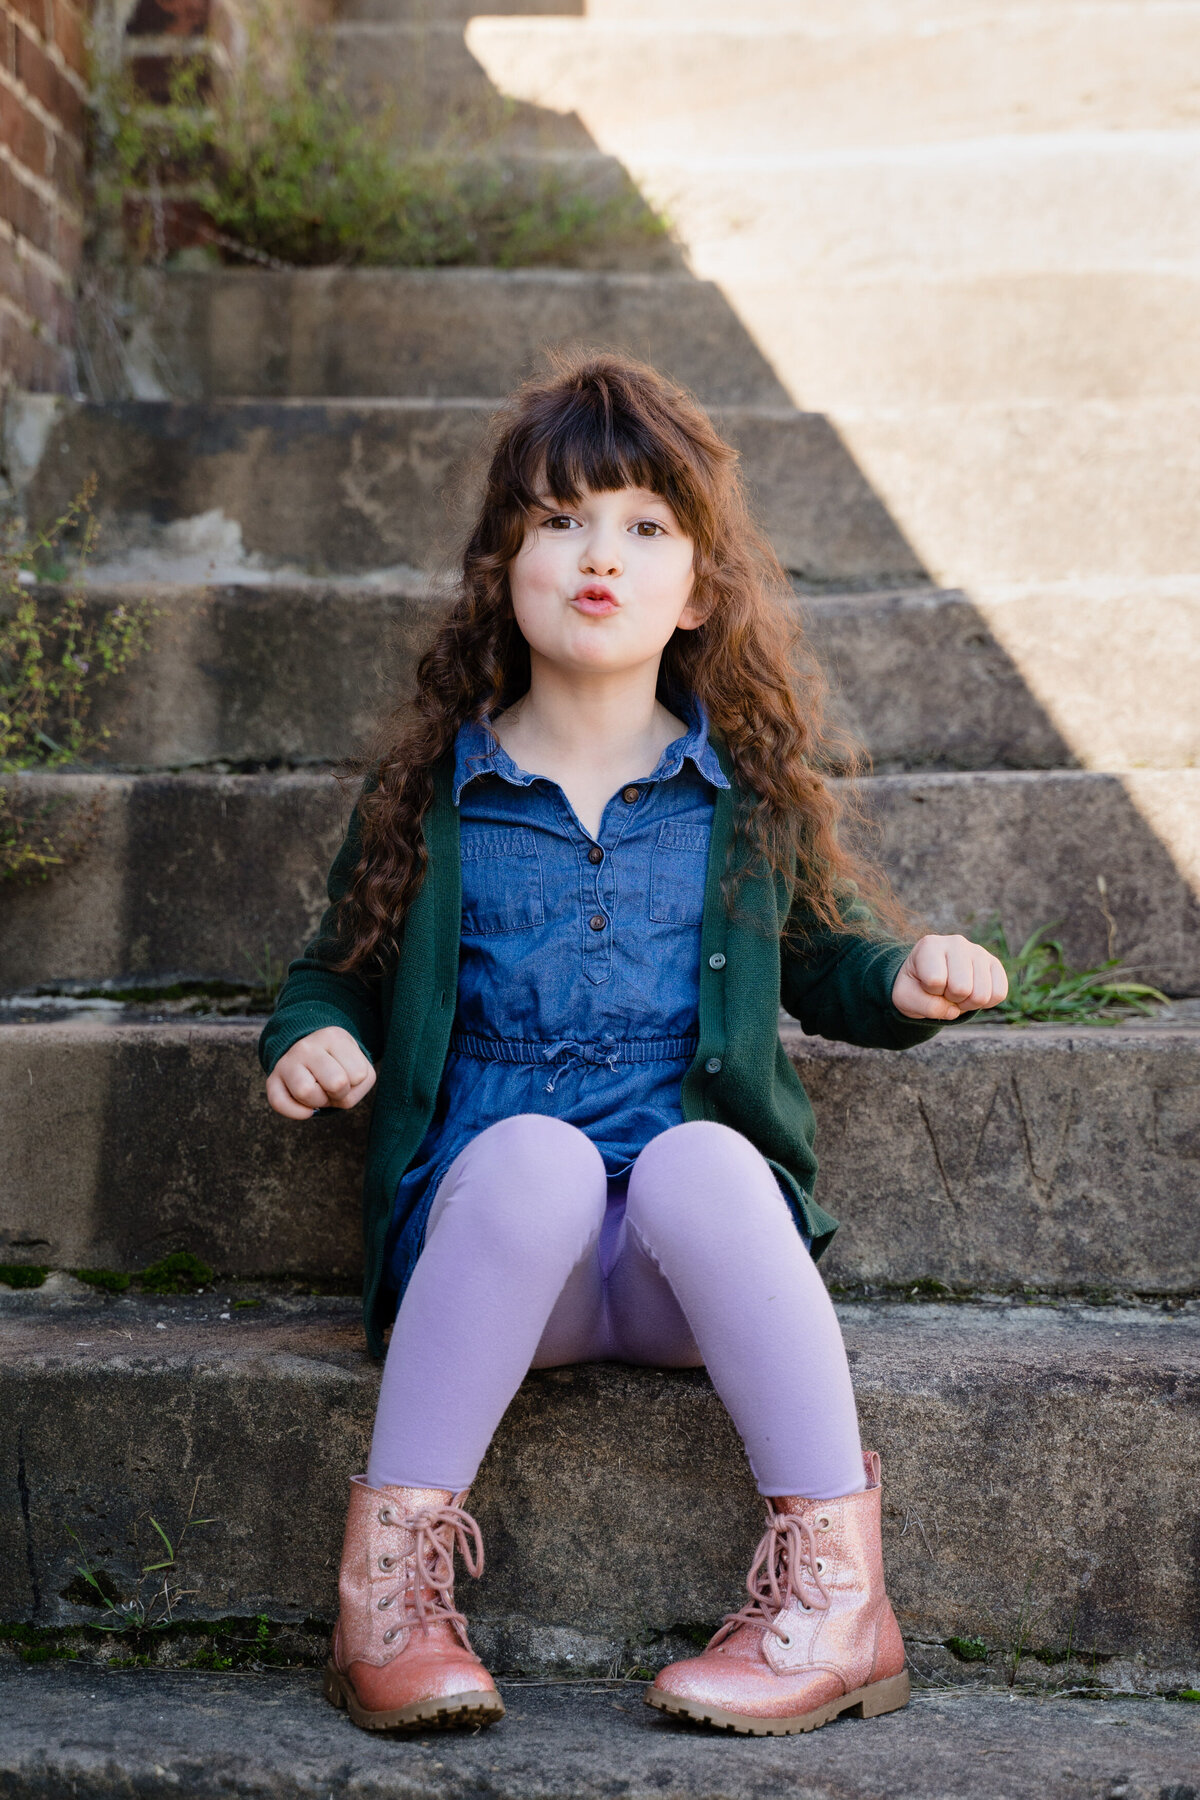 A small child sitting on stone steps making a funny face.